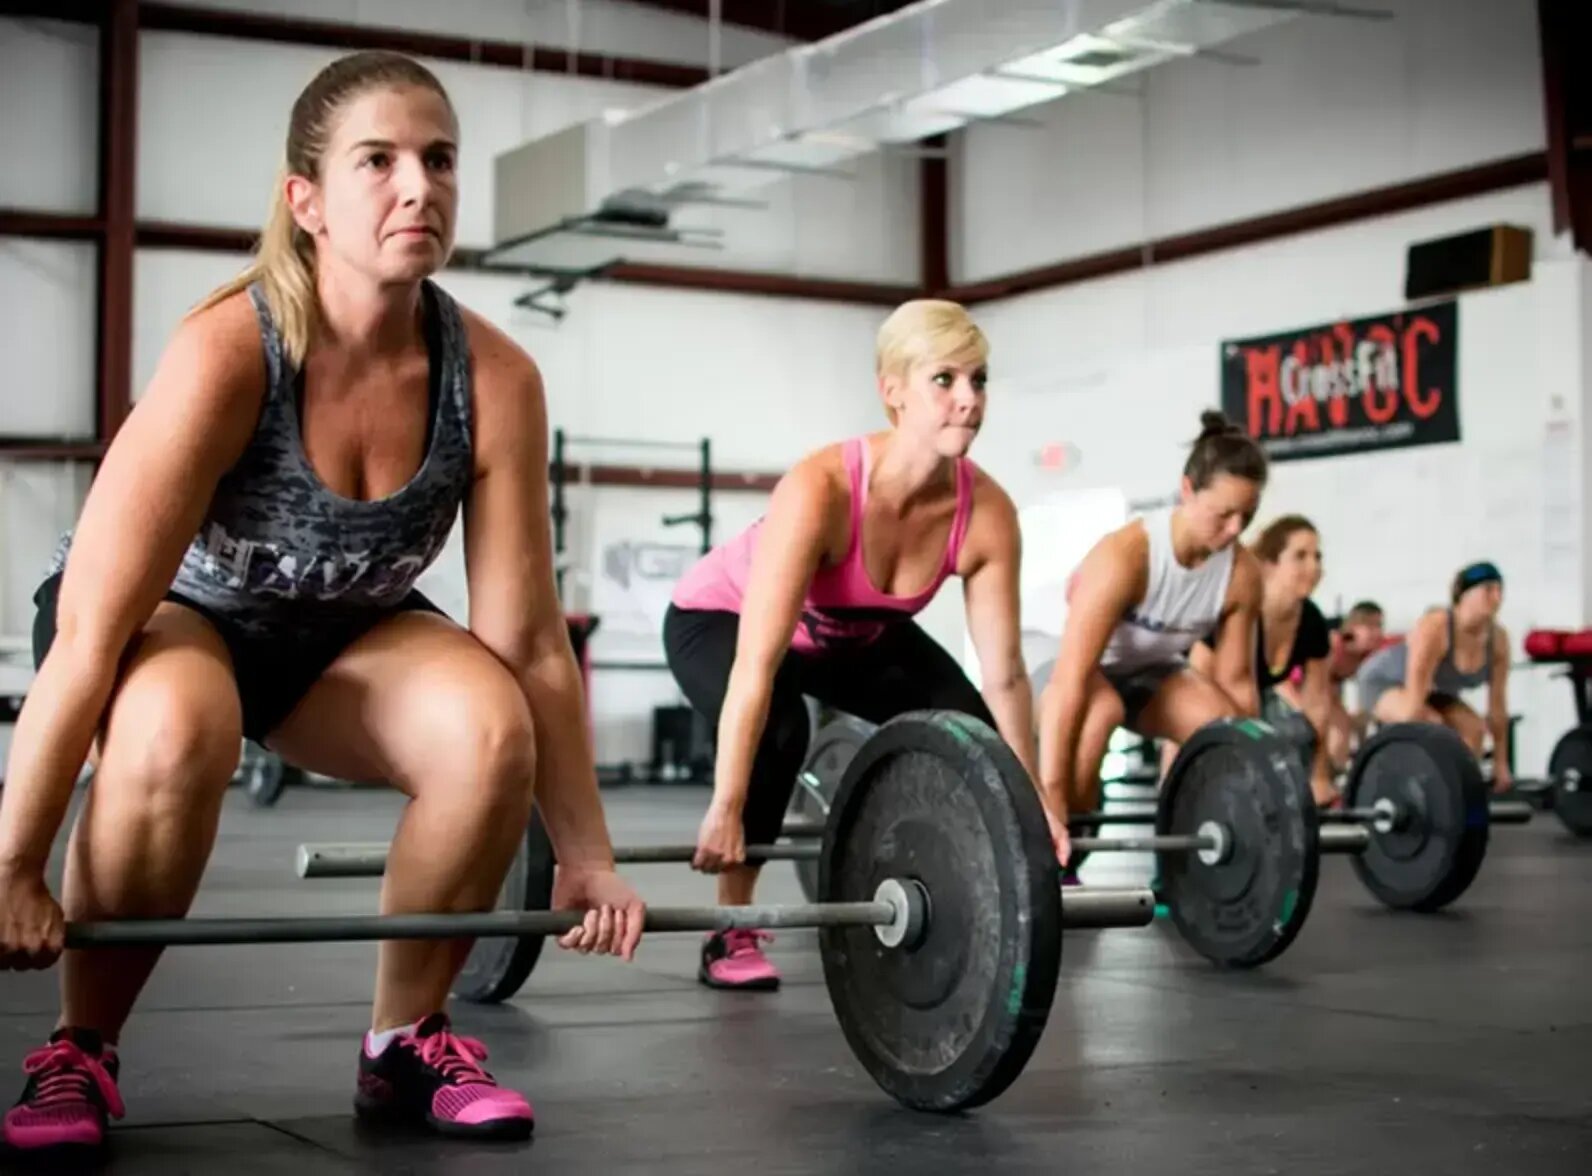 athlete women doing fitness exercise with barbells